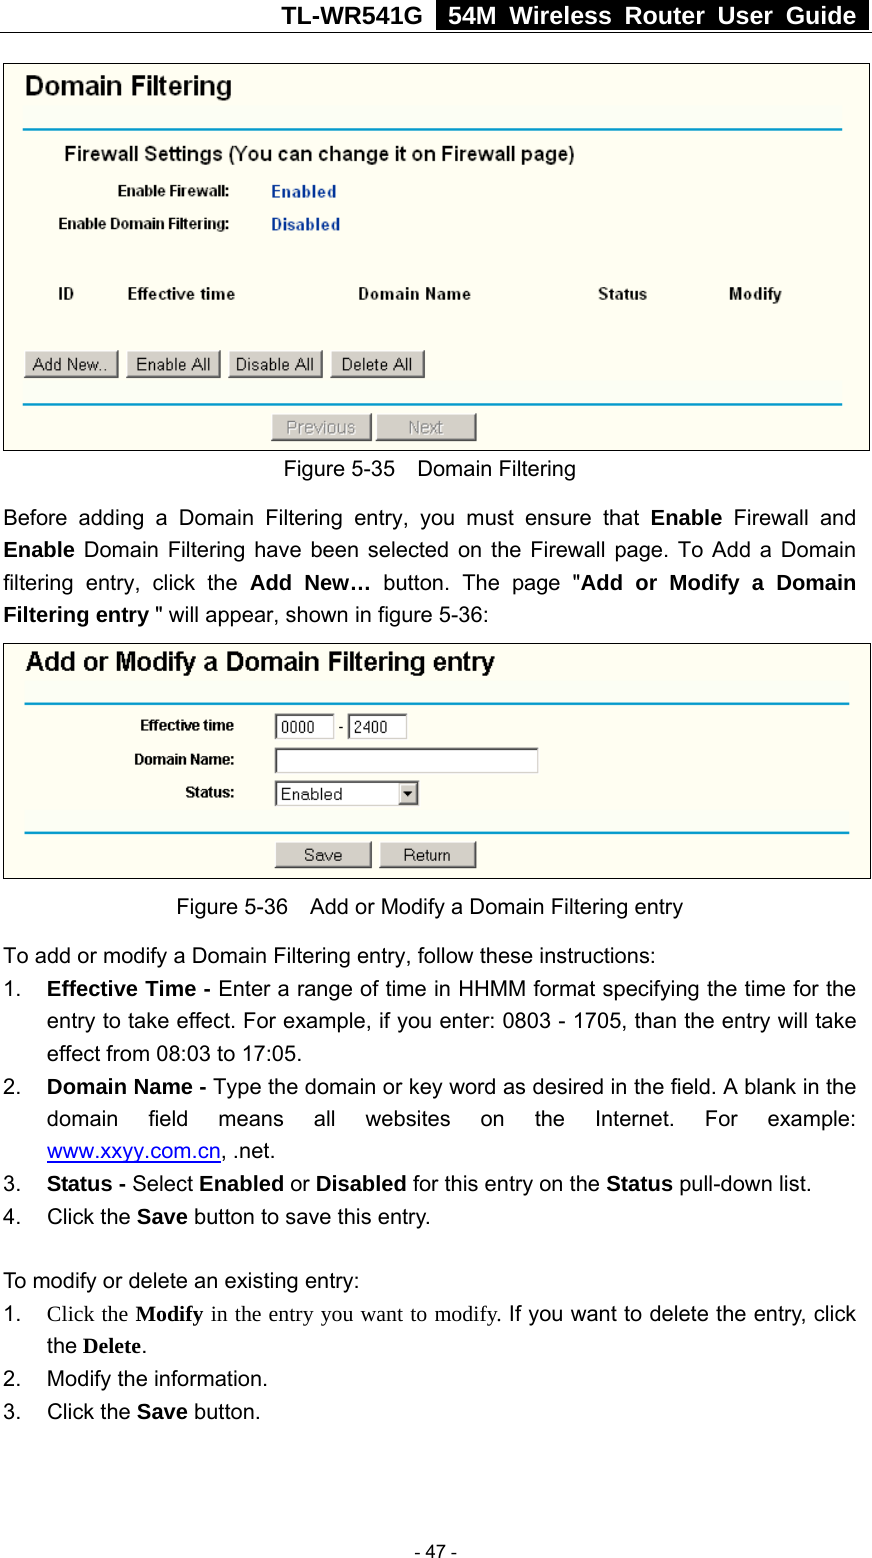 TL-WR541G   54M Wireless Router User Guide   Figure 5-35  Domain Filtering Before adding a Domain Filtering entry, you must ensure that Enable Firewall and Enable Domain Filtering have been selected on the Firewall page. To Add a Domain filtering entry, click the Add New… button. The page &quot;Add or Modify a Domain Filtering entry &quot; will appear, shown in figure 5-36:  Figure 5-36    Add or Modify a Domain Filtering entry To add or modify a Domain Filtering entry, follow these instructions: 1.  Effective Time - Enter a range of time in HHMM format specifying the time for the entry to take effect. For example, if you enter: 0803 - 1705, than the entry will take effect from 08:03 to 17:05. 2.  Domain Name - Type the domain or key word as desired in the field. A blank in the domain field means all websites on the Internet. For example: www.xxyy.com.cn, .net. 3.  Status - Select Enabled or Disabled for this entry on the Status pull-down list. 4. Click the Save button to save this entry.  To modify or delete an existing entry: 1.  Click the Modify in the entry you want to modify. If you want to delete the entry, click the Delete. 2.  Modify the information.   3. Click the Save button.   - 47 - 